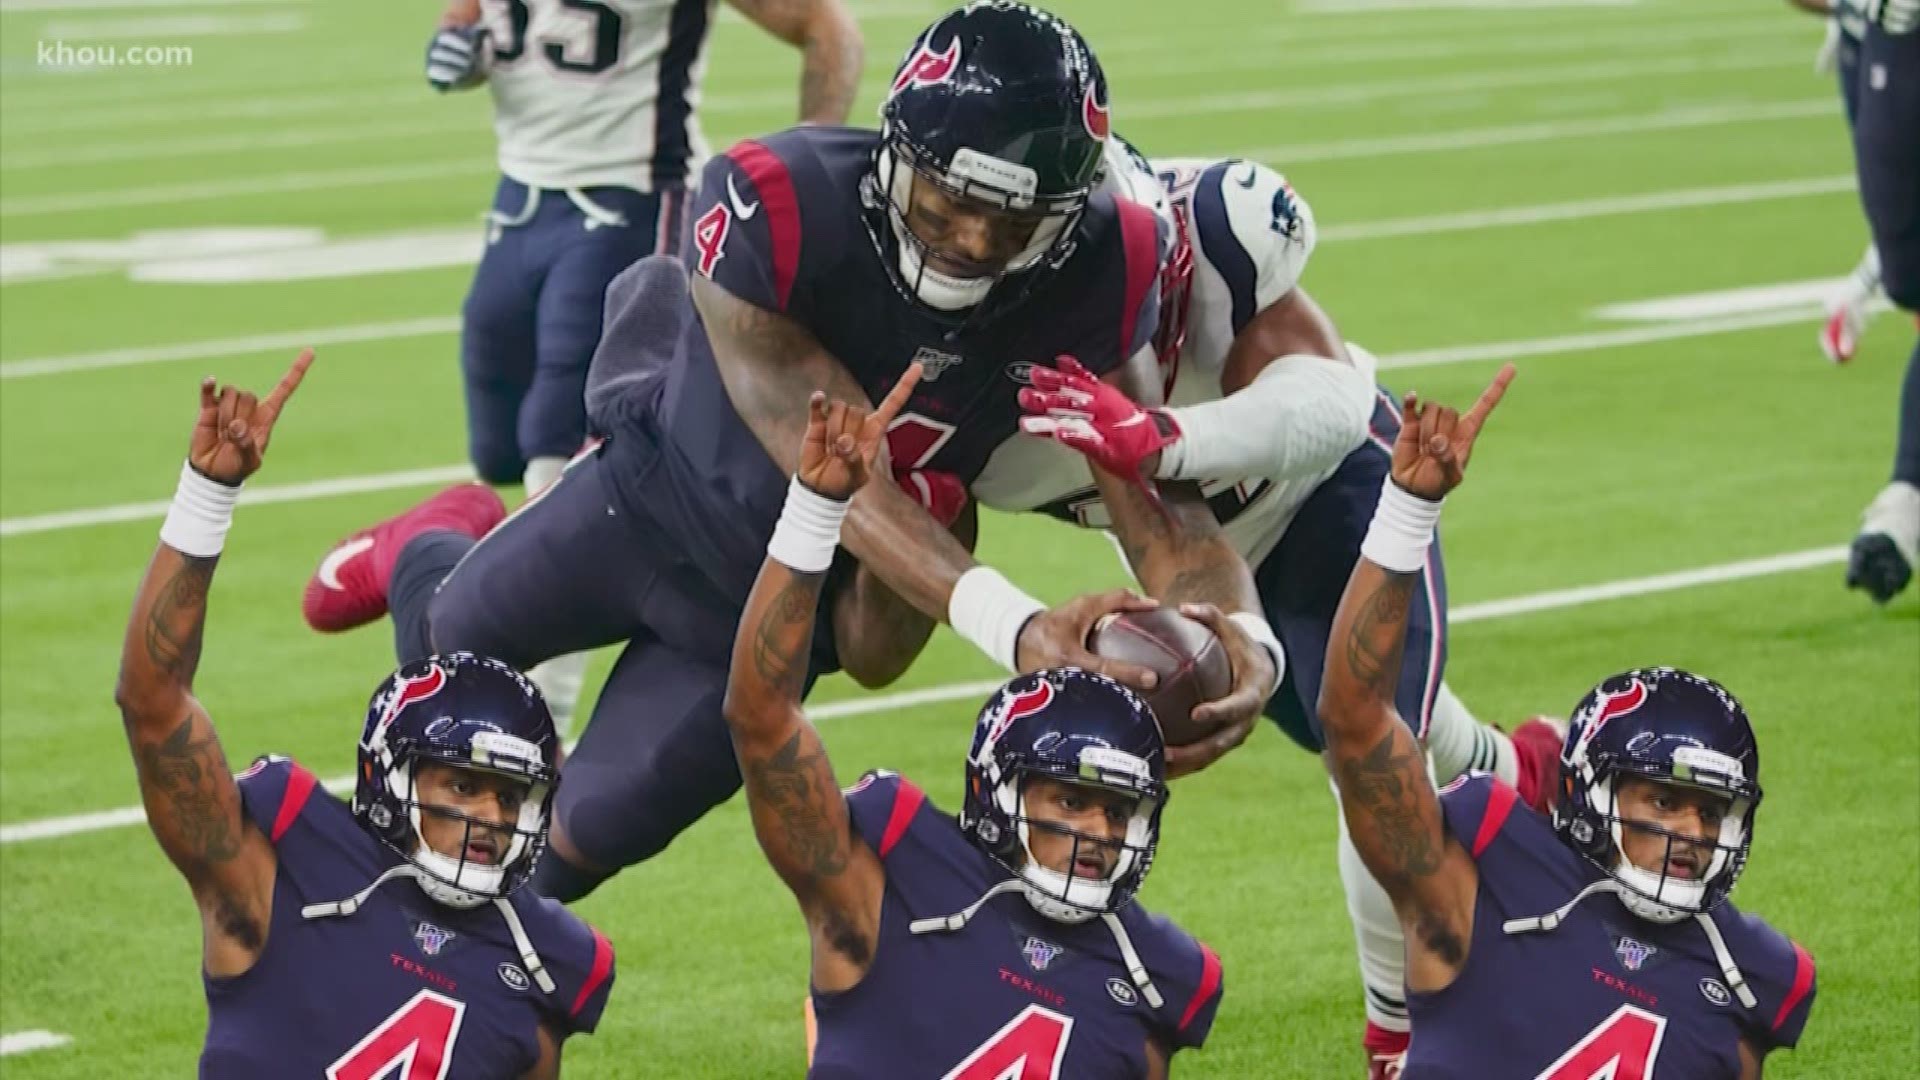 Houston Texans quarterback Deshaun Watson has been named AFC Offensive Player of the Week after the team’s 28-22 win over the New England Patriots Sunday.